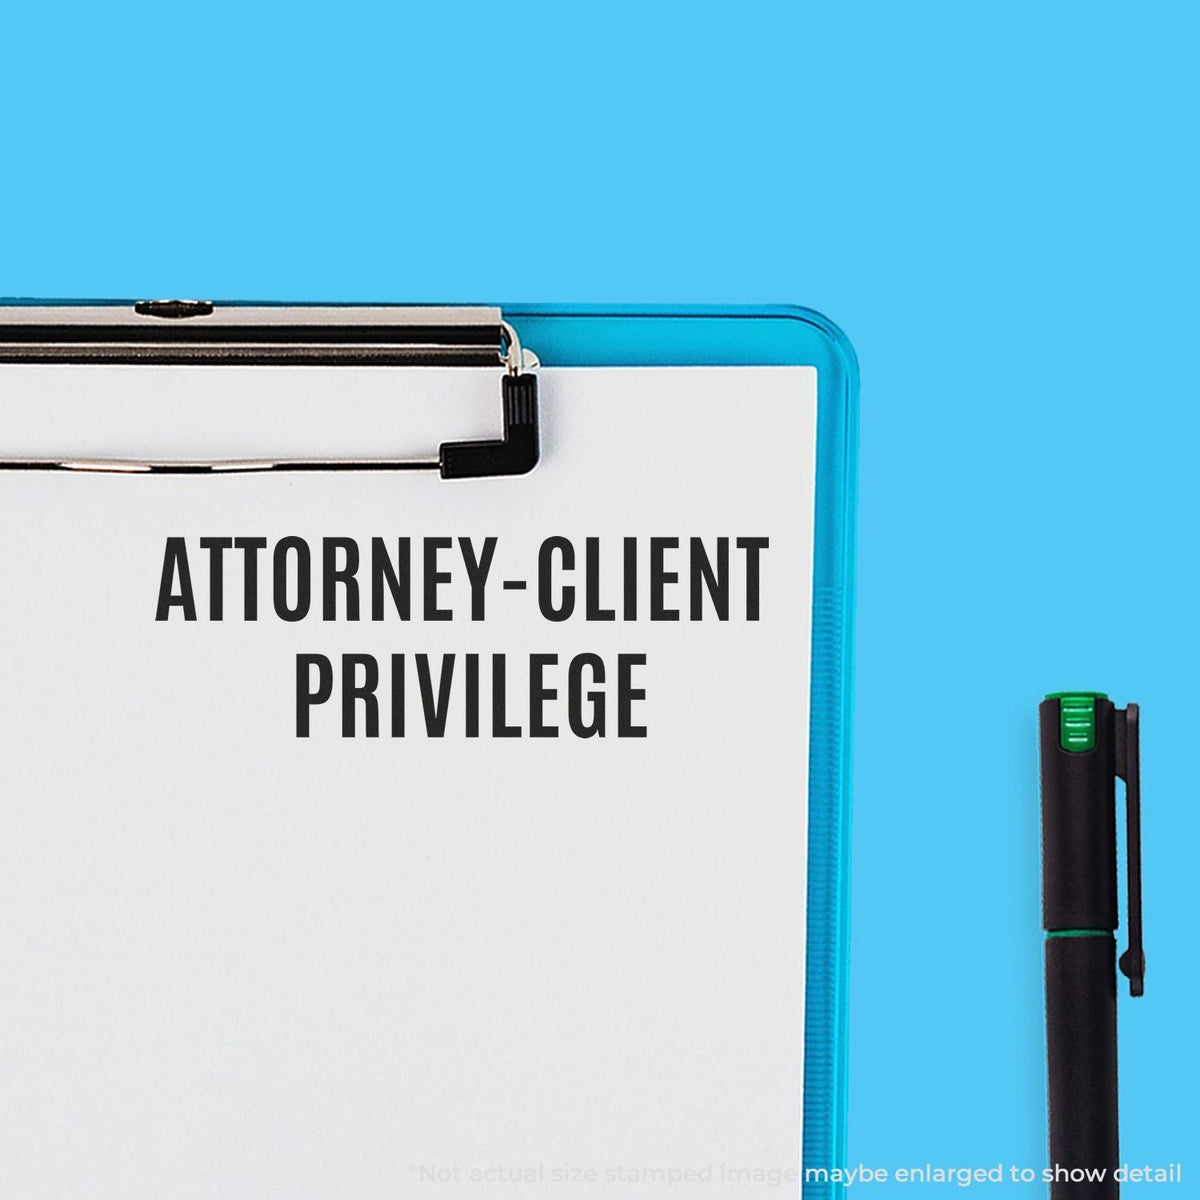 In Use Large Pre-Inked Attorney-Client Privilege Stamp Image